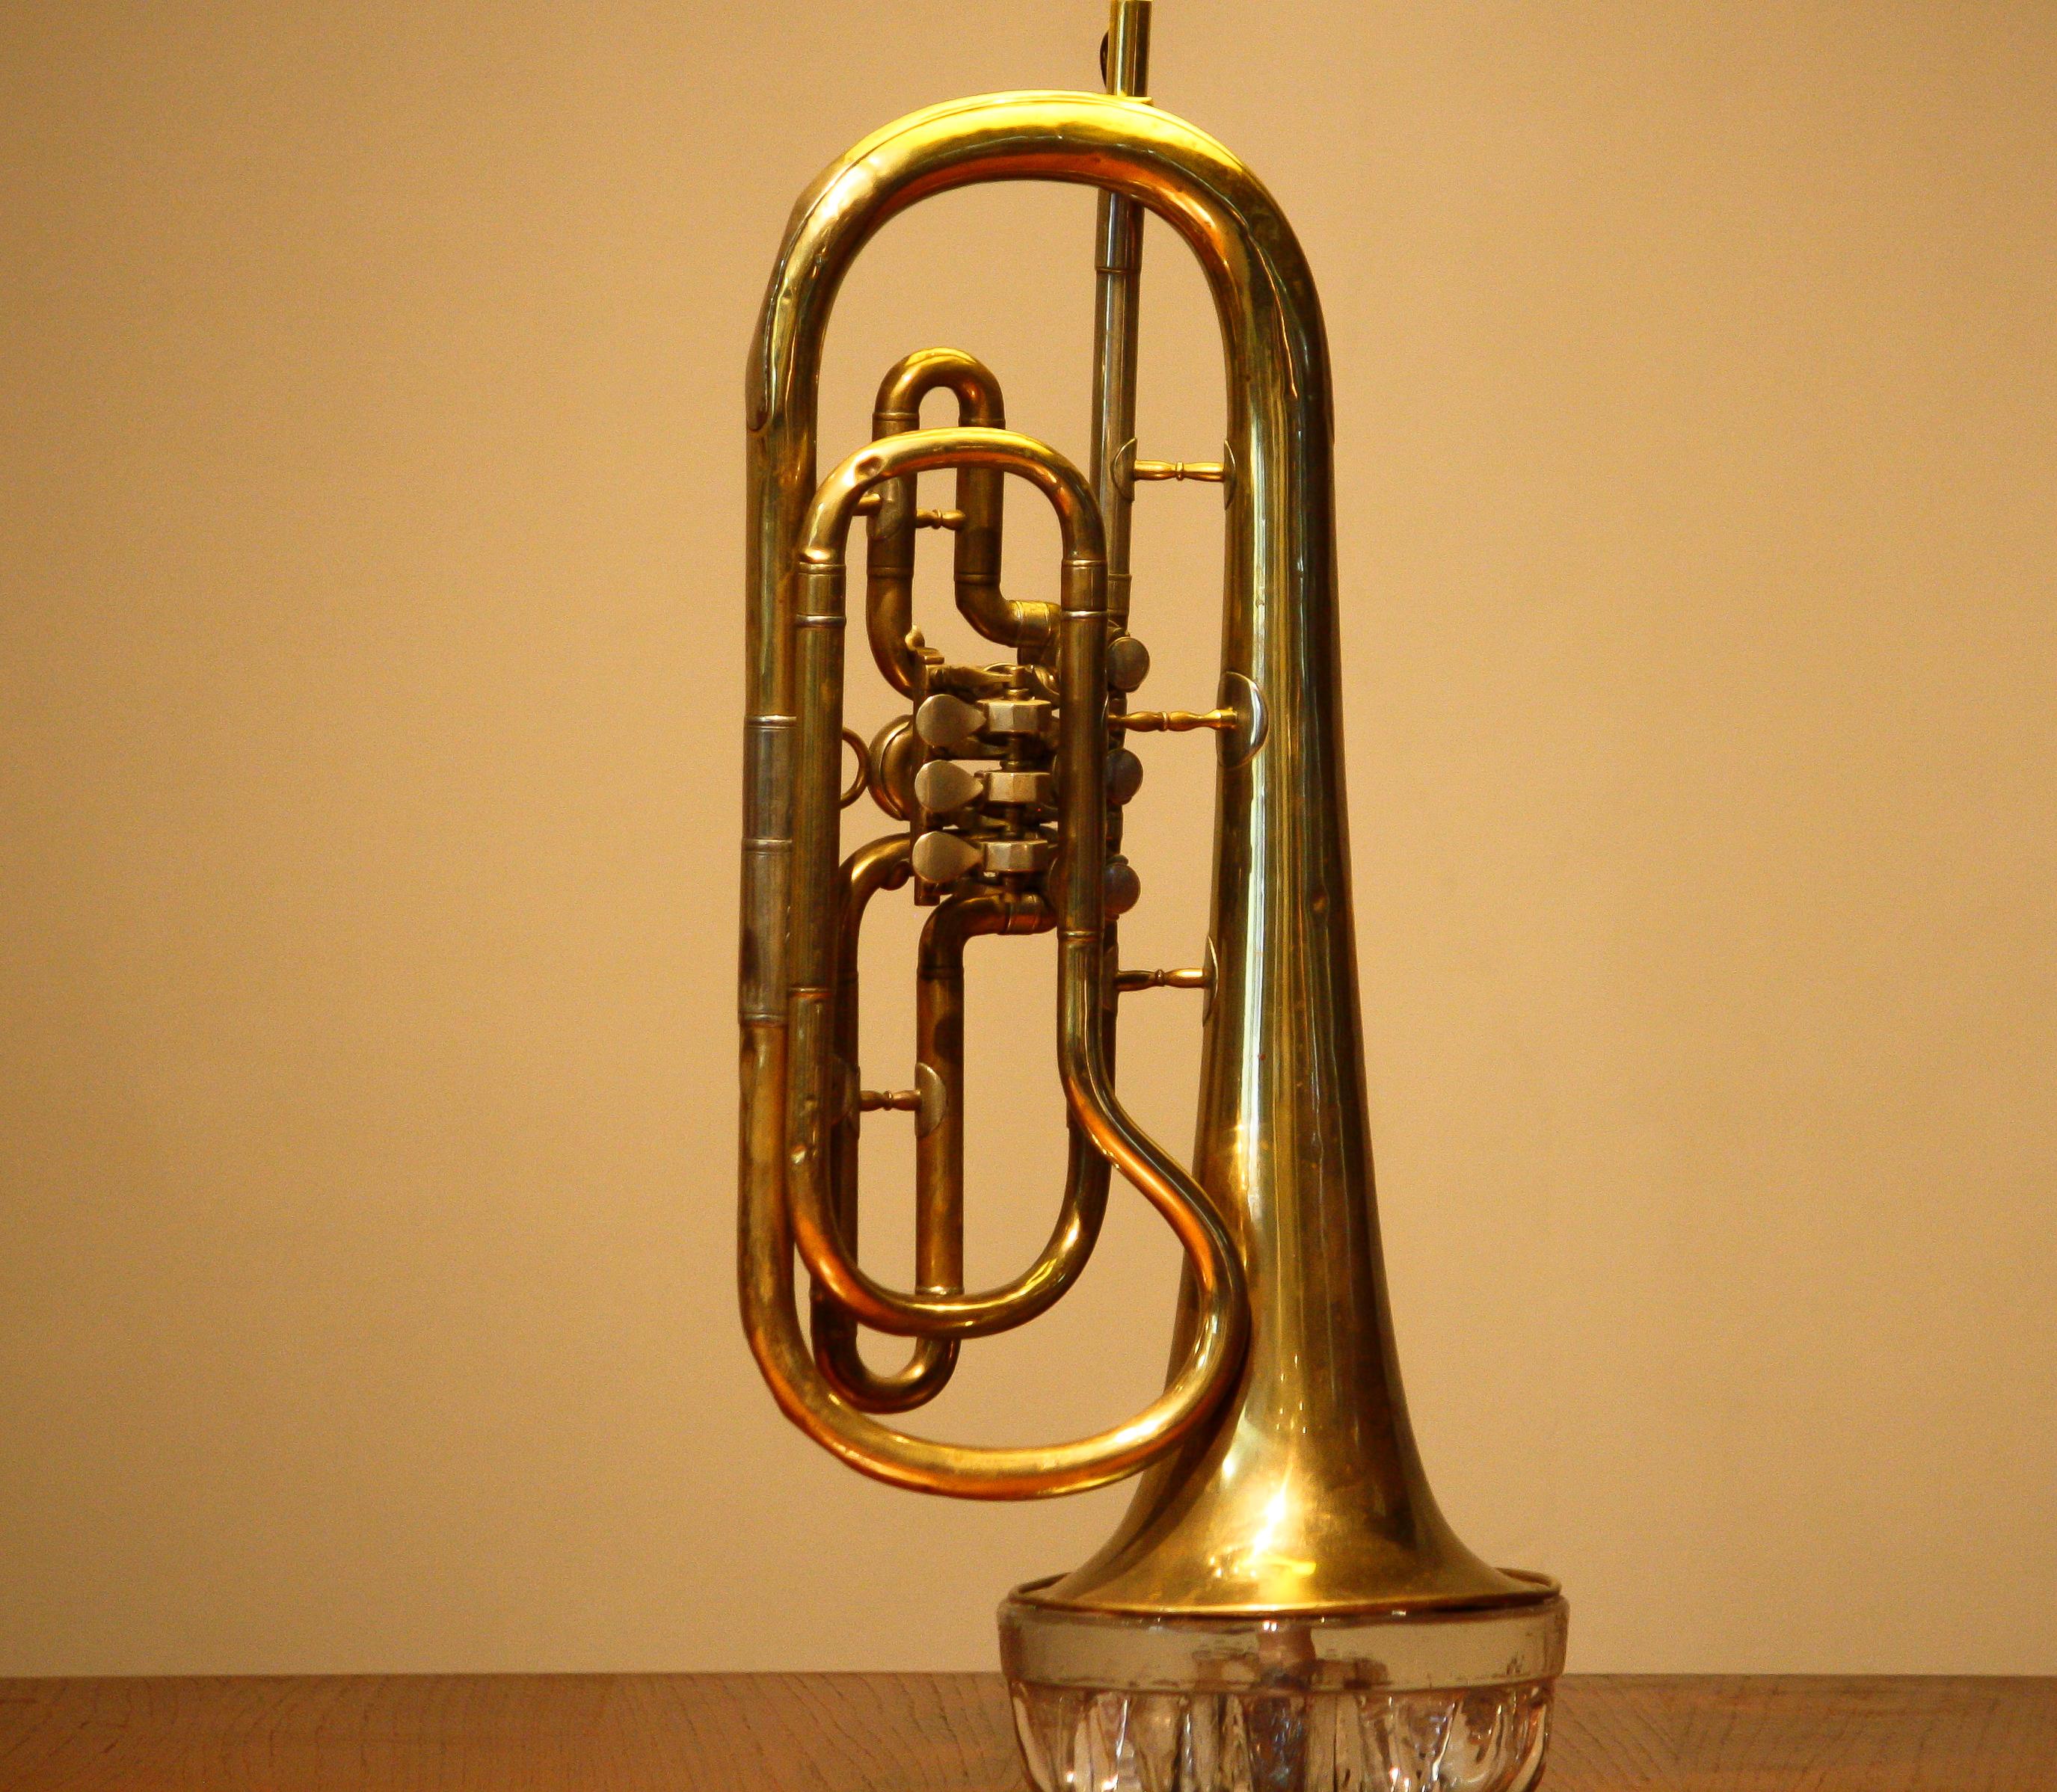 Decorative, table lamp made of an American brass cornet flaps trumpet from the 1920s.
Art Deco / Jugendstil style.
Technically 100%. One E26 / E27 bulb.
The dimensions are: H.72 cm - 28 inch / W 27 cm - 11 inch.